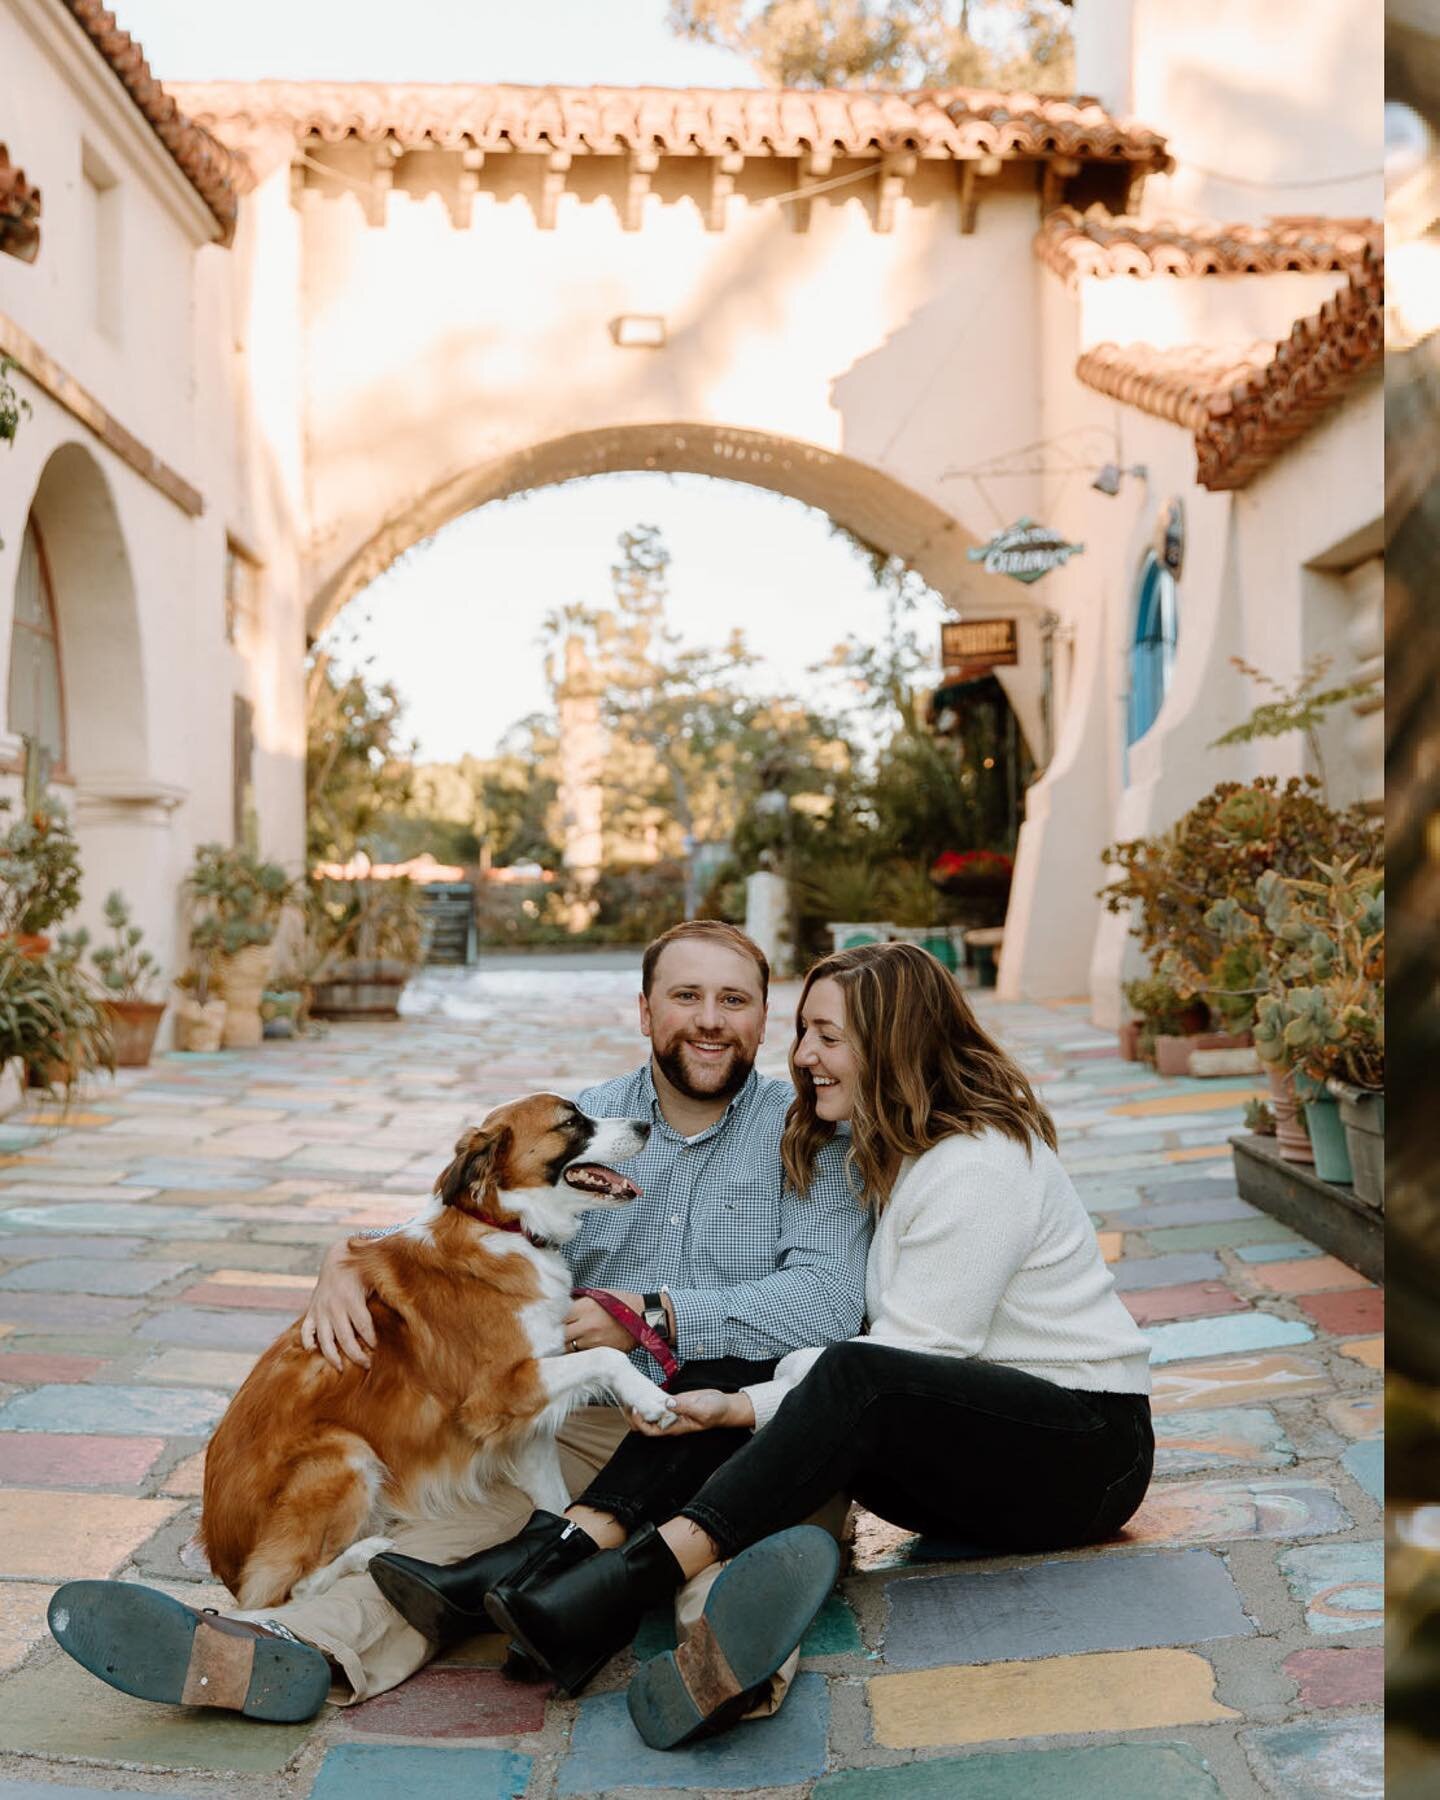 loved getting to meet these two and their pup before they make the big move to chicago! also, swipe to the last slide for the biggest puppy smile i&rsquo;ve ever seen 🐶
&bull;
&bull;
&bull;
&bull;
#photographer #sandiegophotographer #sandiegocouples